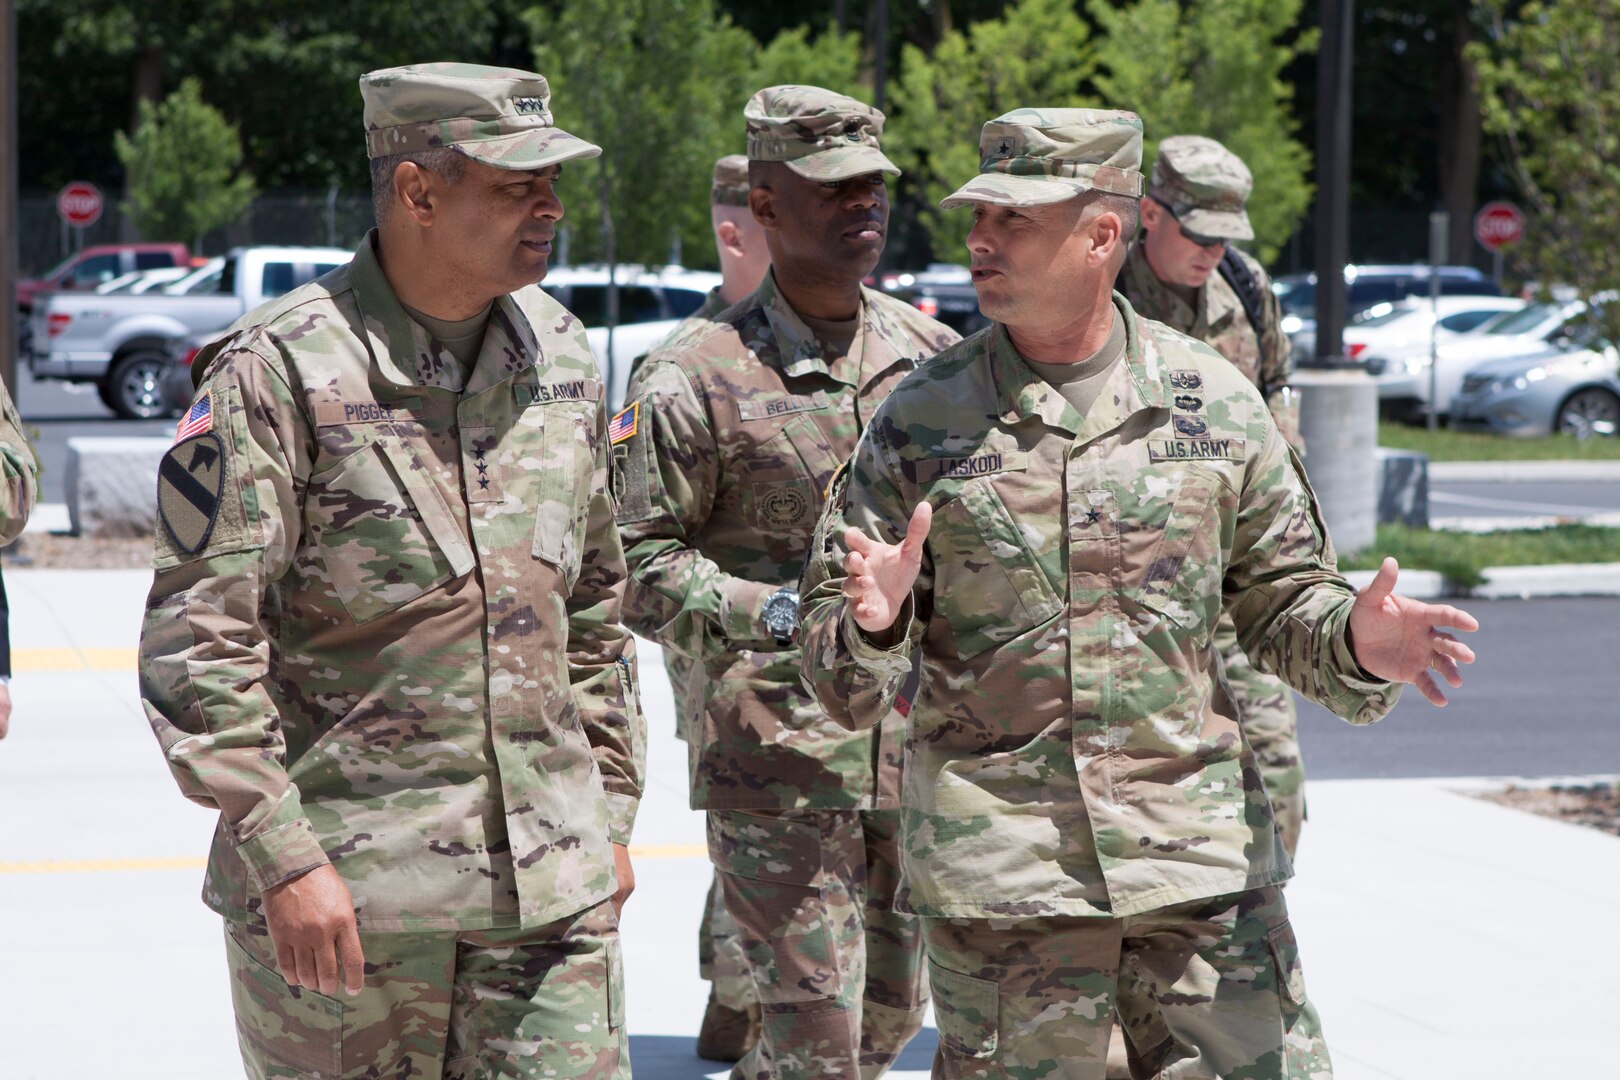 Army Lt. Gen.  Aundre F. Piggee (far left), deputy chief of staff for Army logistics (G-4) and members of his team join Brig. Gen. John Laskodi (right, gesturing), commander of DLA Distribution, at DLA Distribution headquarters June 27.